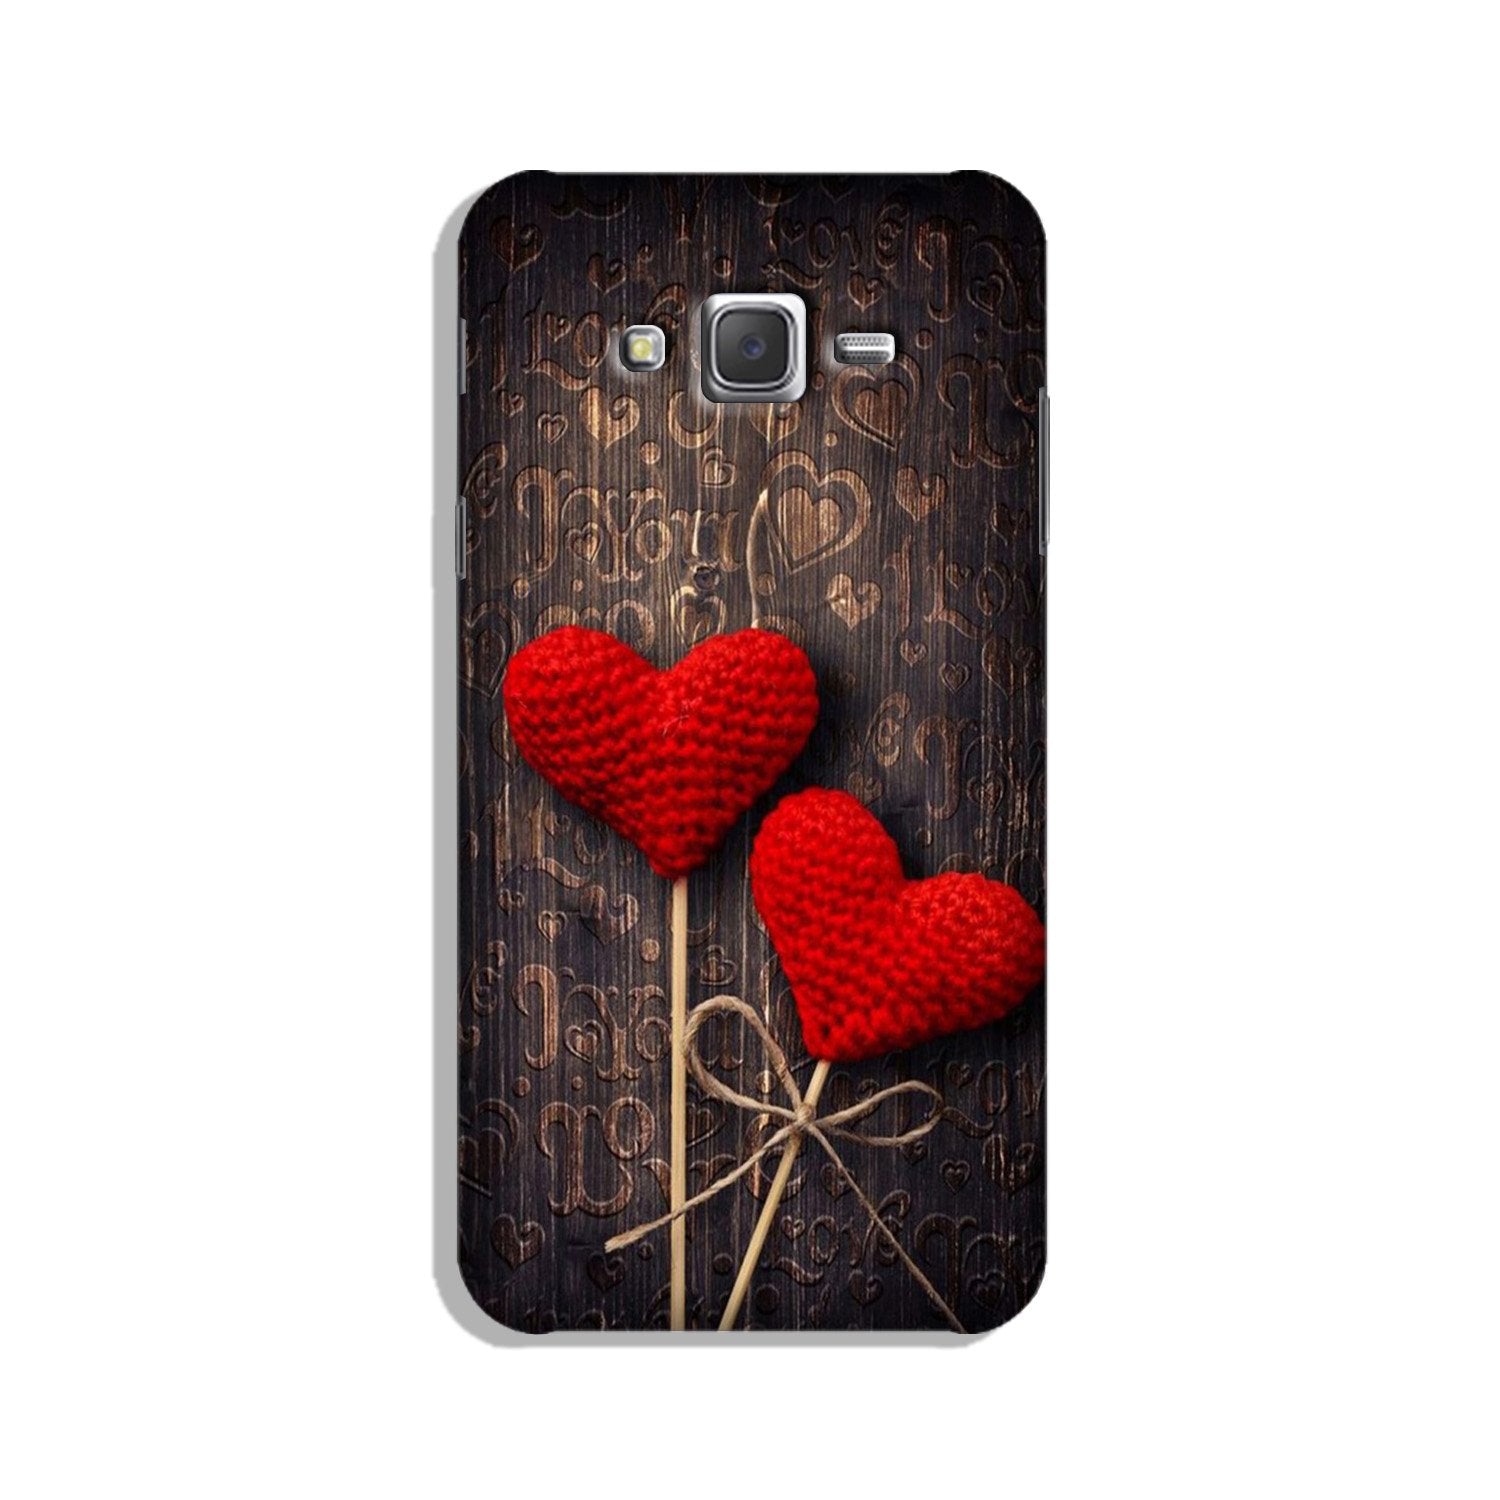 Red Hearts Case for Galaxy J7 (2015)